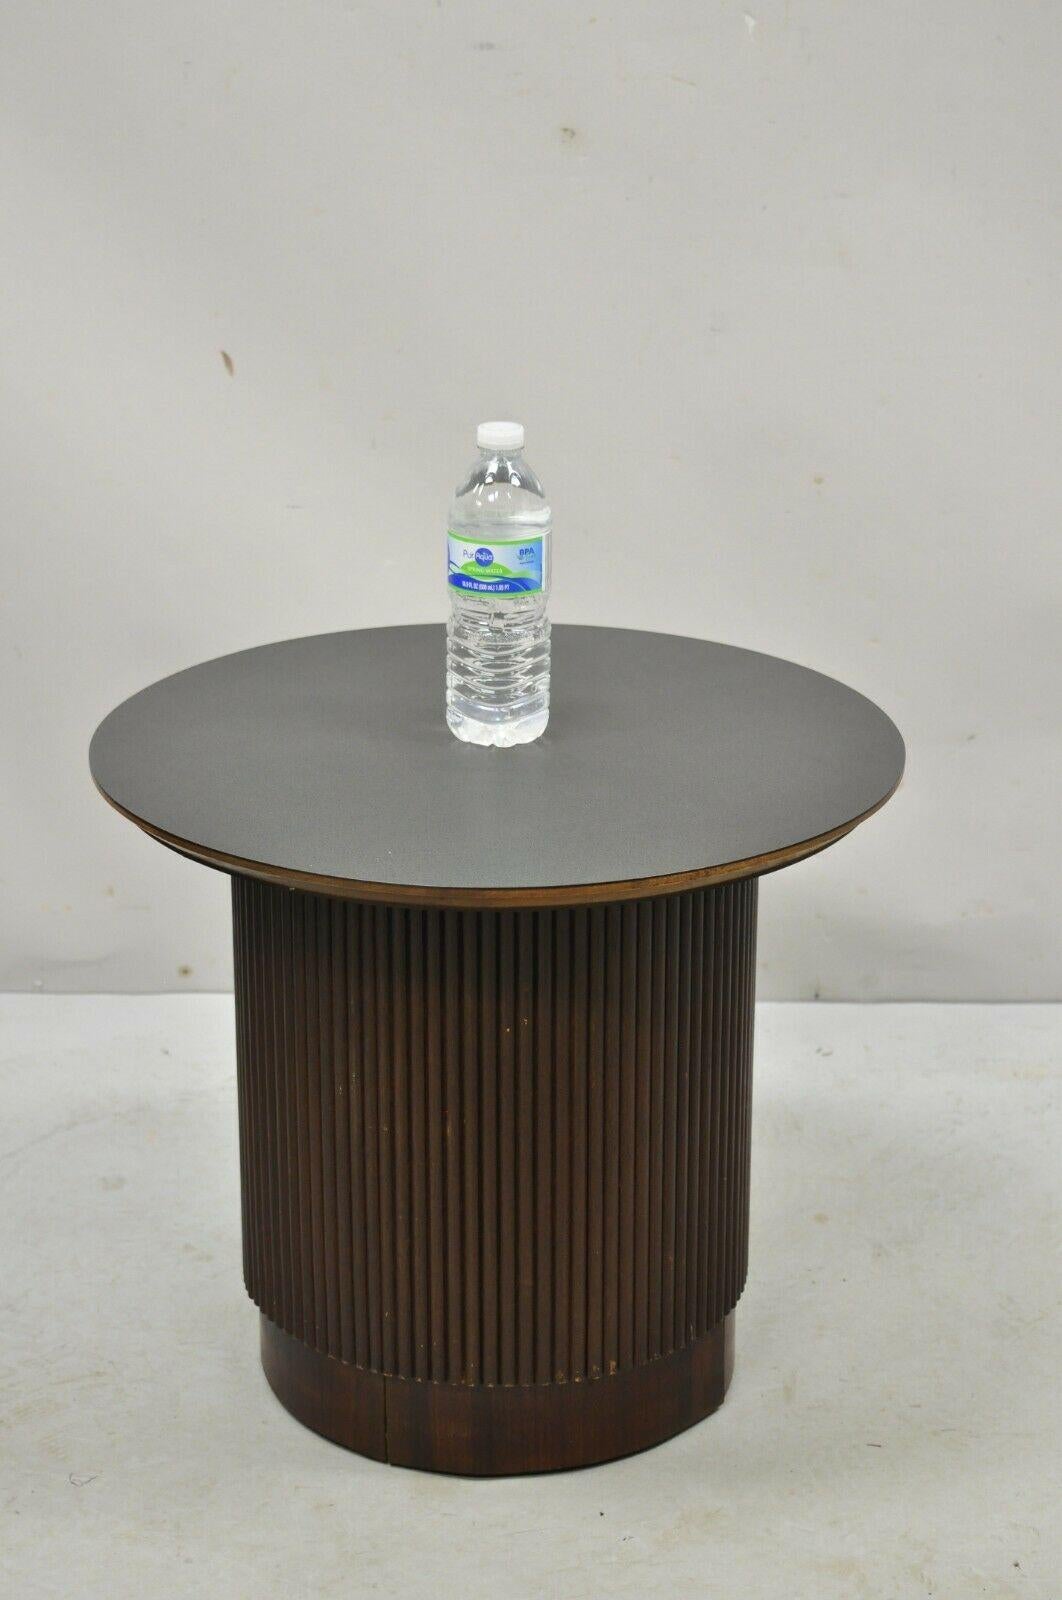 Lane Mid-Century Modern walnut round black laminate top drum side table. Item features black laminate top, wooden ribbed base, clean Modernist lines, great style and form. Circa 1960s. Measurements: 17